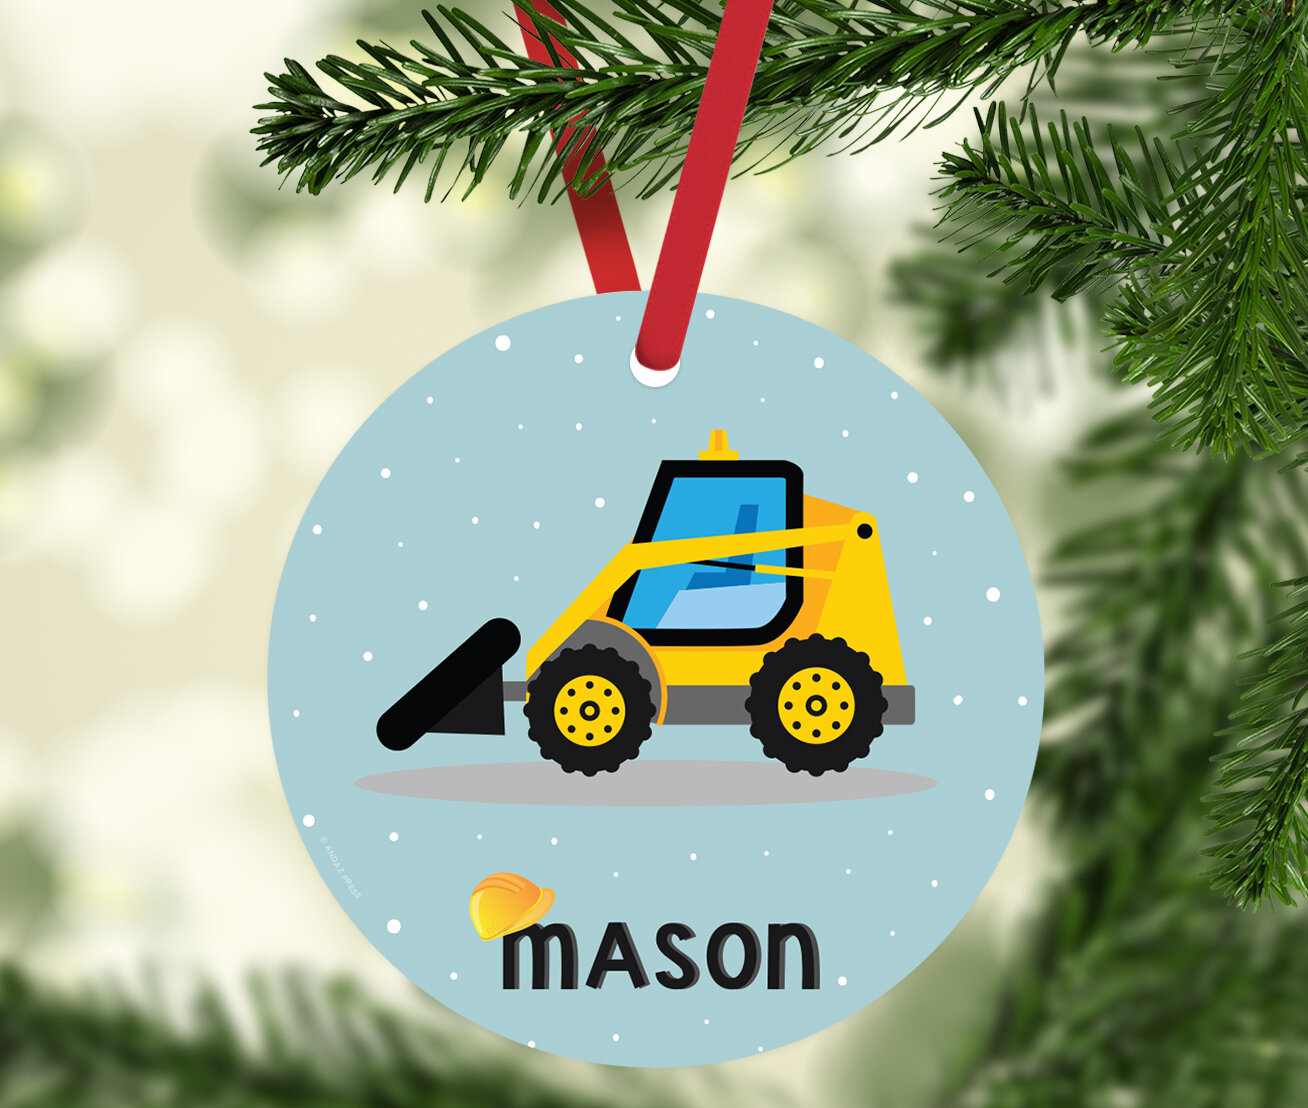 Personalized Blue Tractor Ornament for Christmas Tree Decoration 